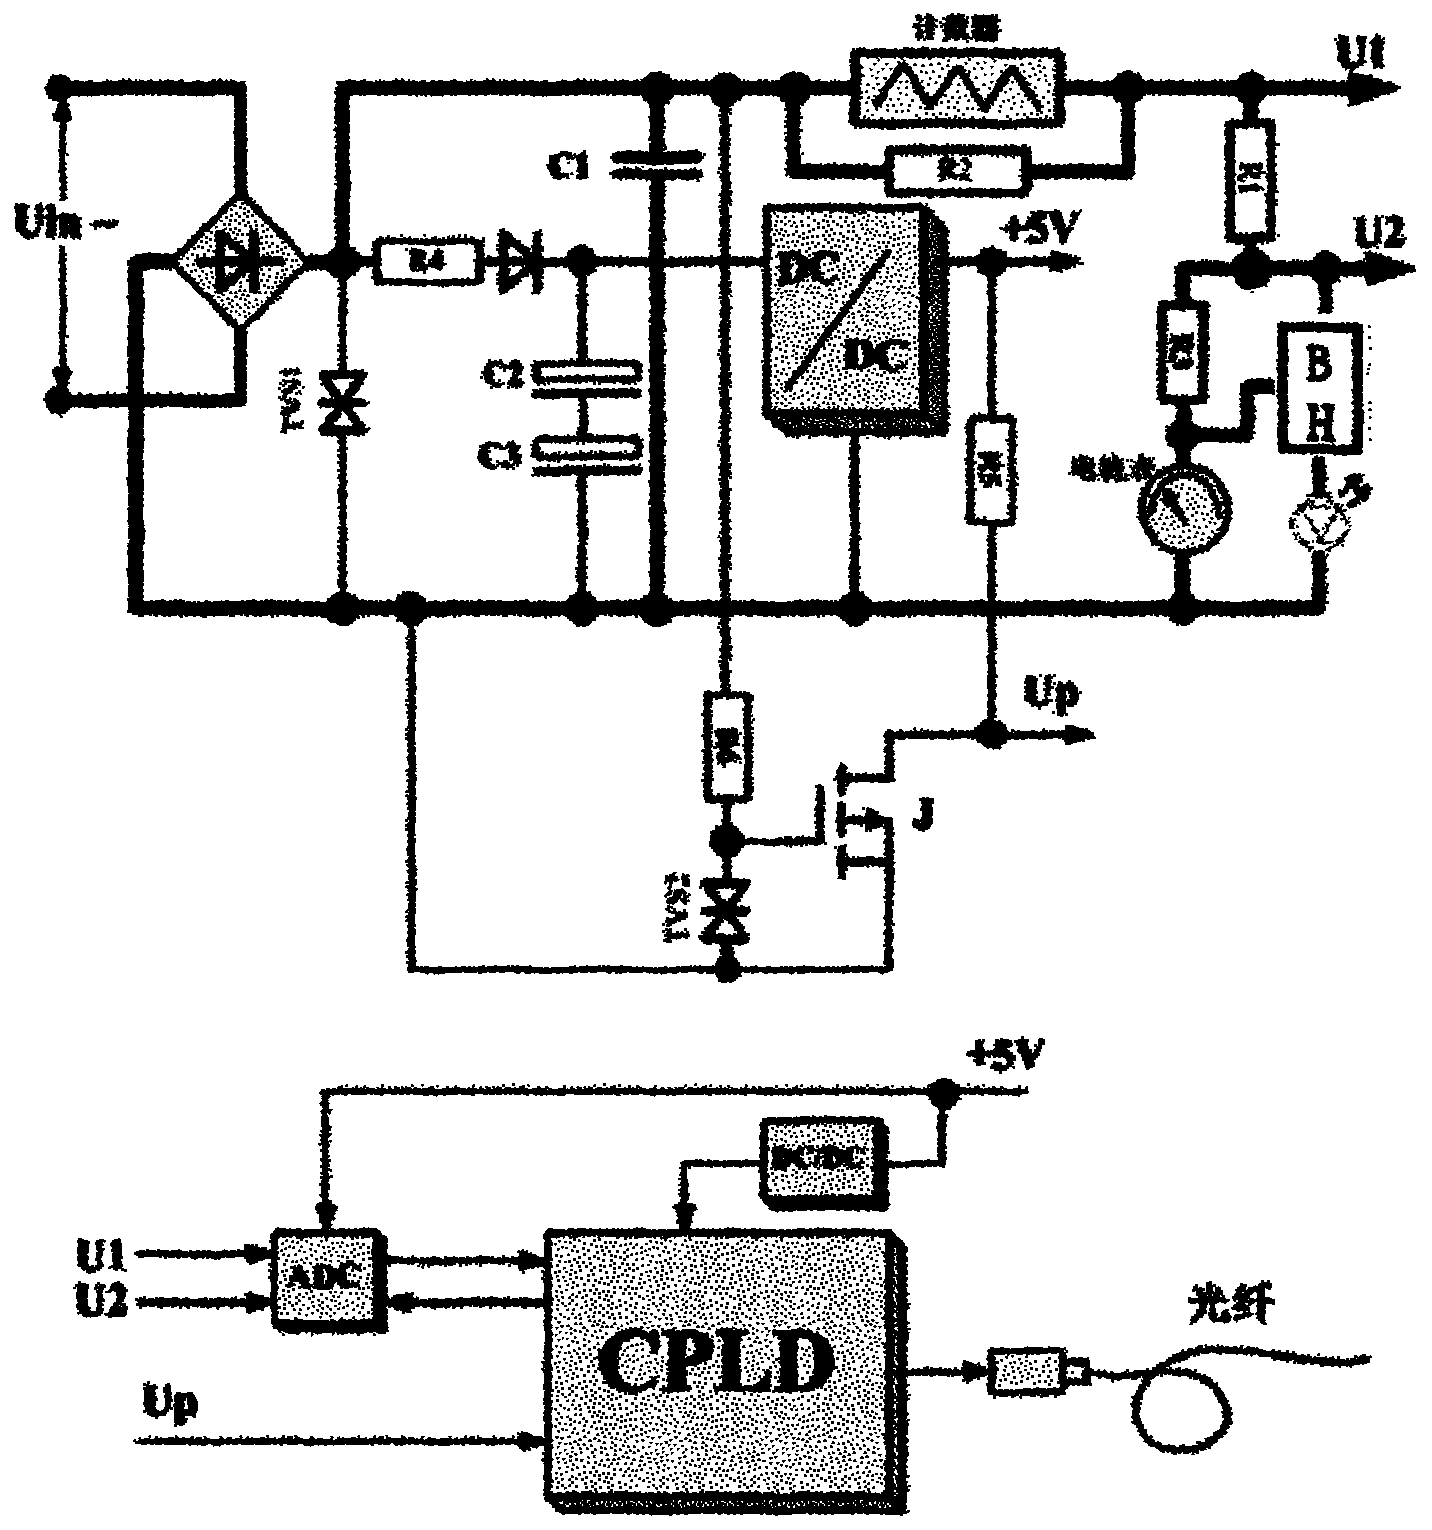 On-line arrester monitoring device with self-energy-taking function